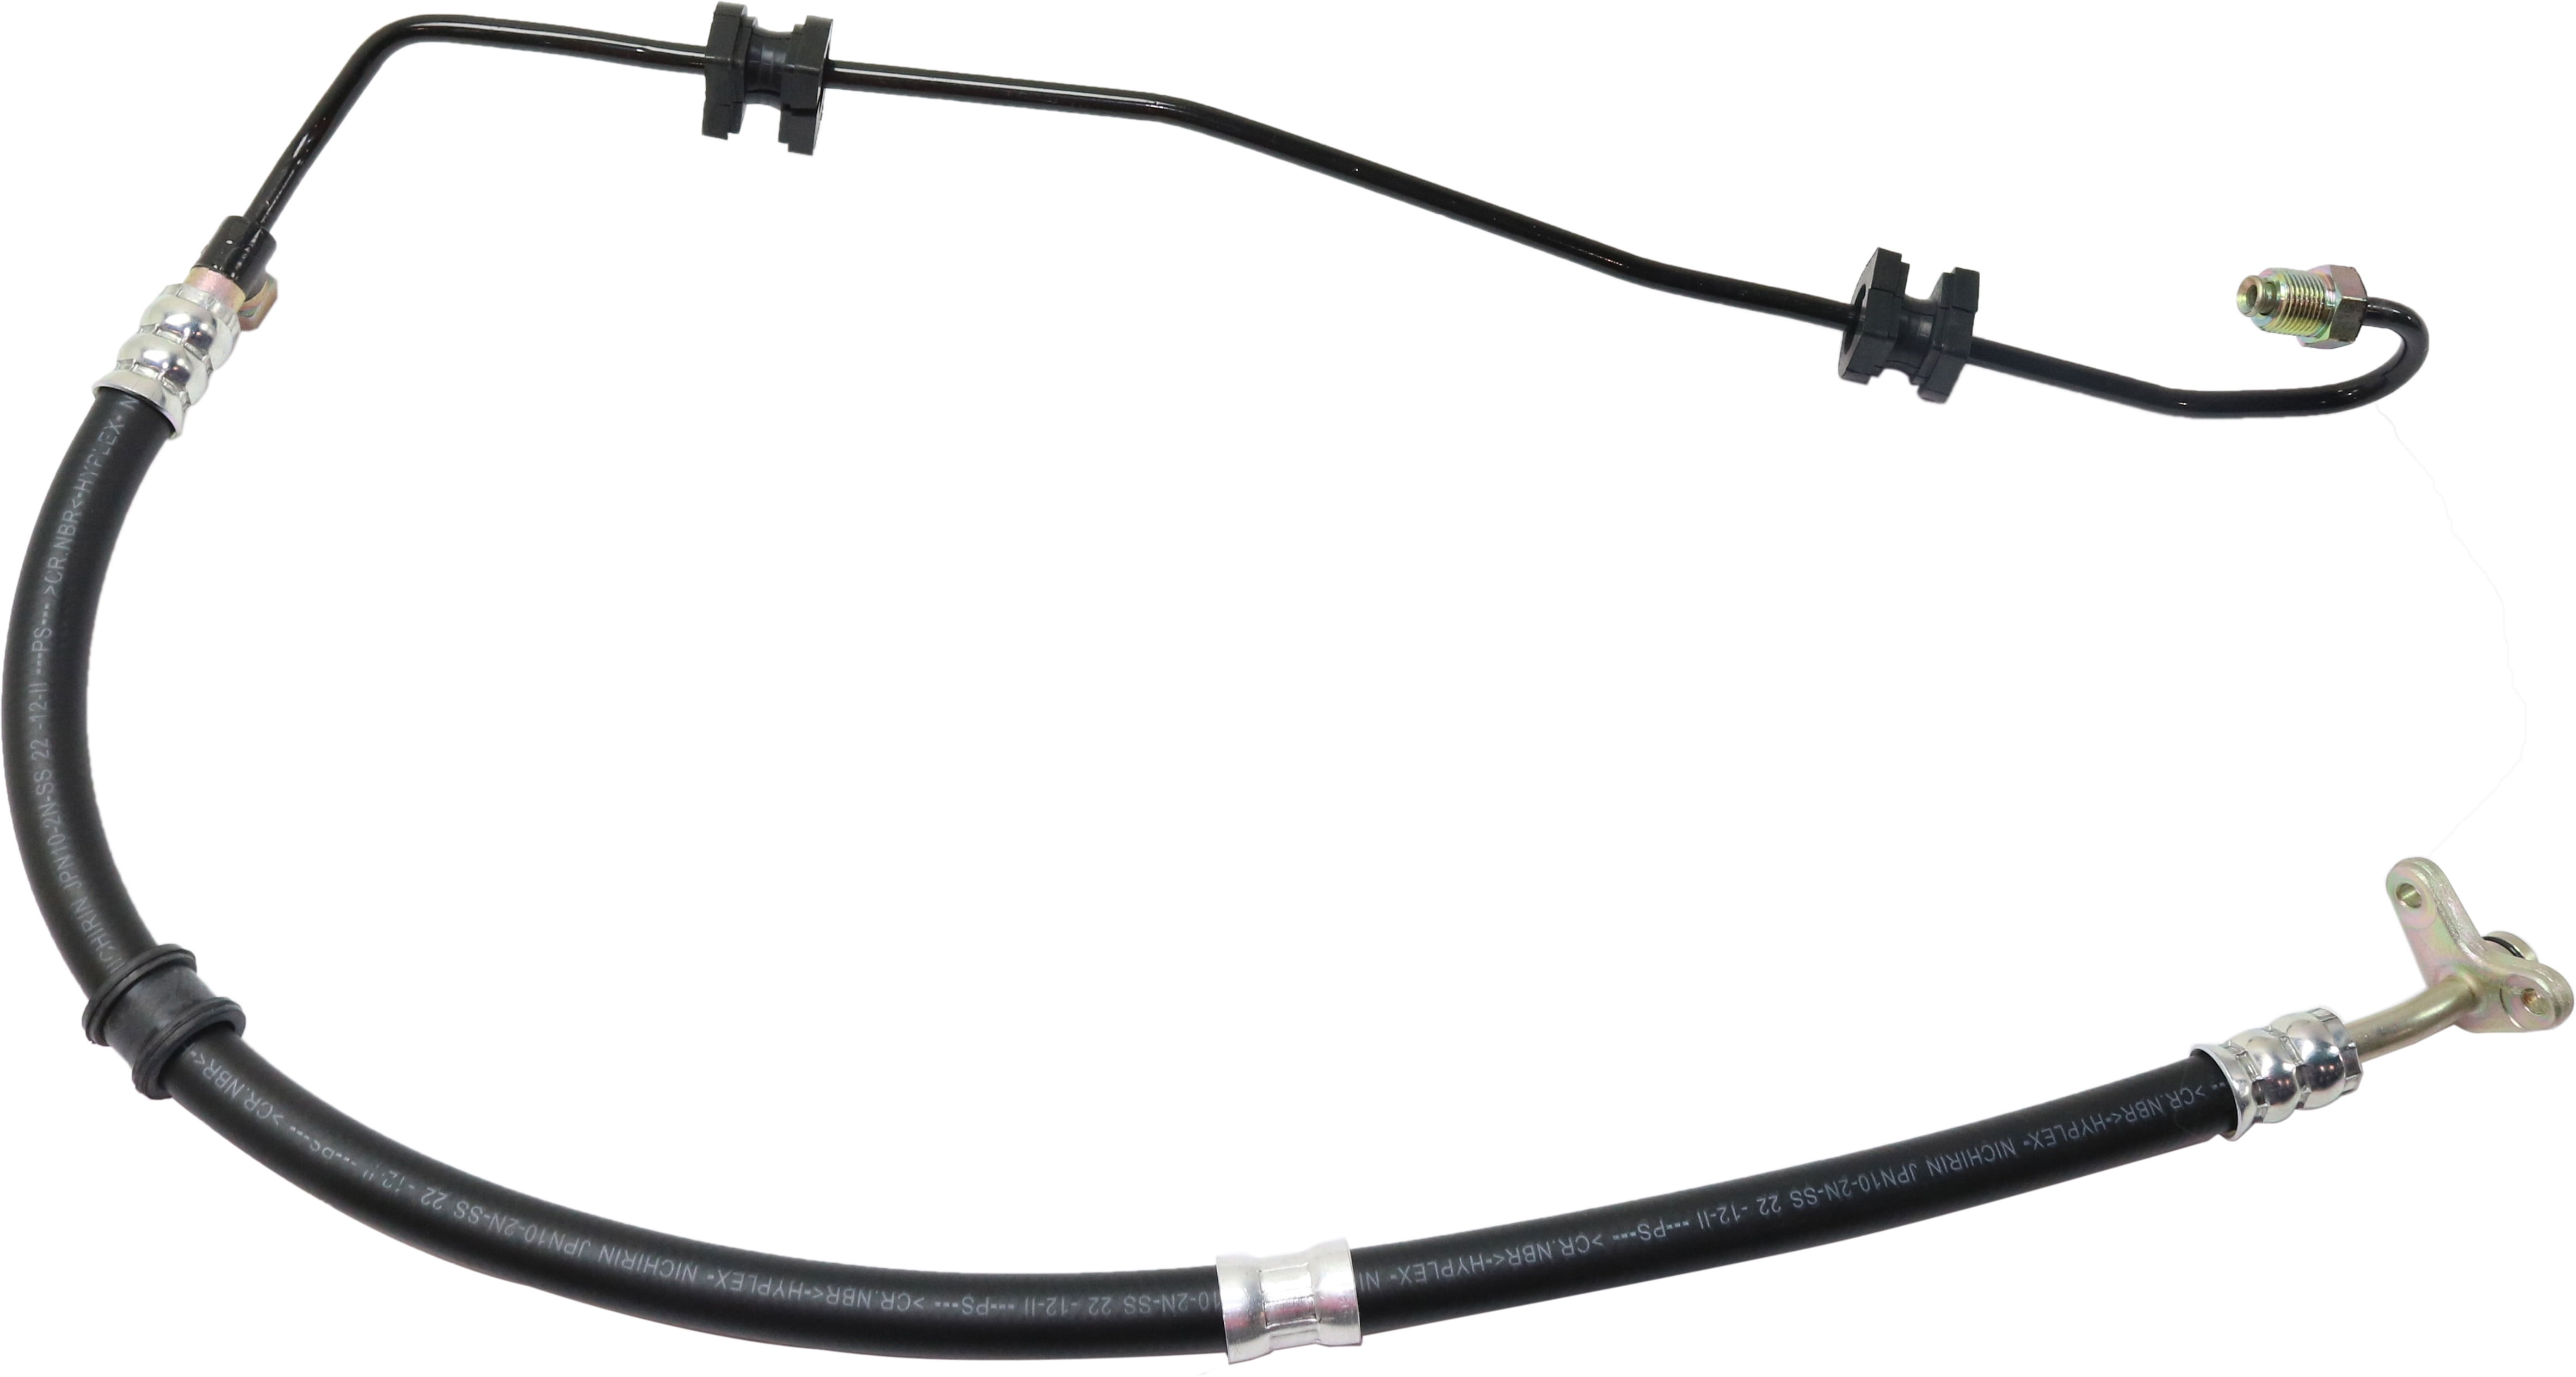 Replacement RH28990001 Power Steering Hose Compatible with 2007-2011 Honda  CR-V Pressure 